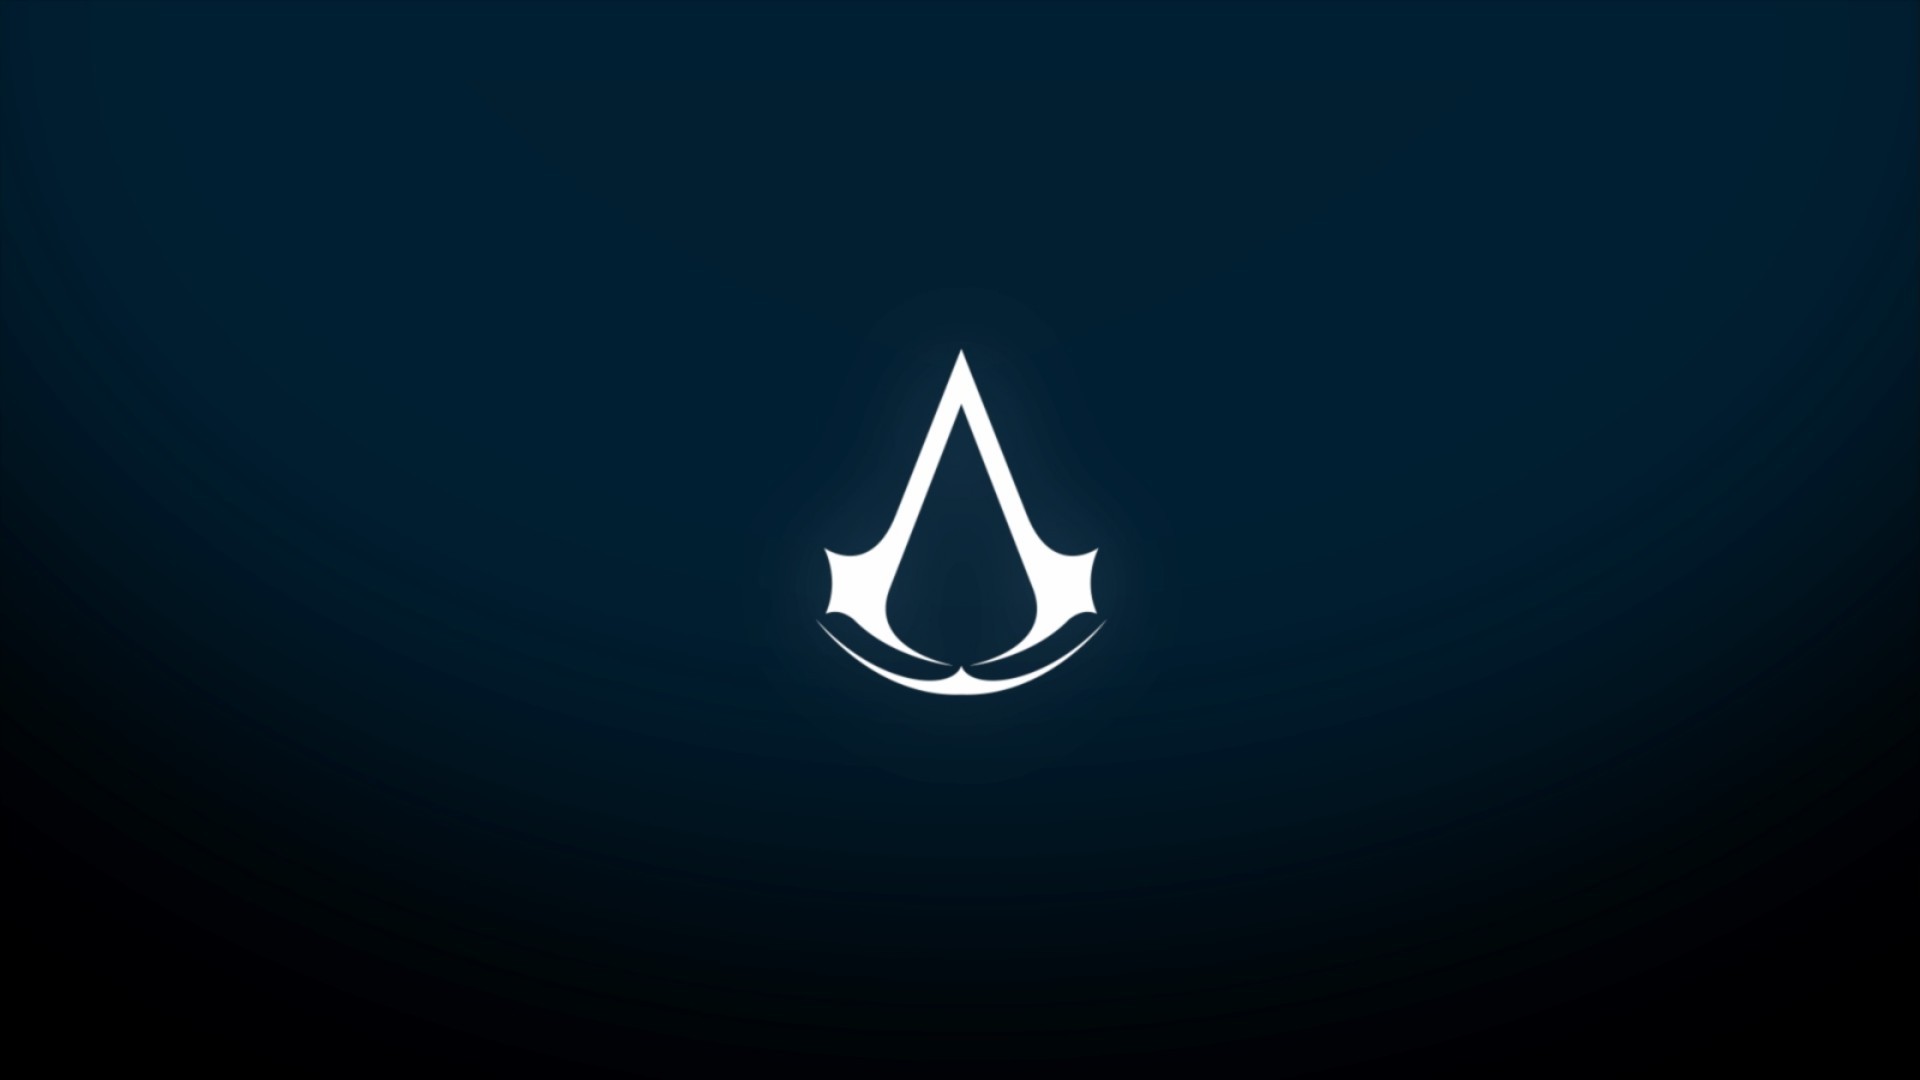 General 1920x1080 Assassin's Creed logo video games PC gaming simple background blue background Assassin's Creed Syndicate